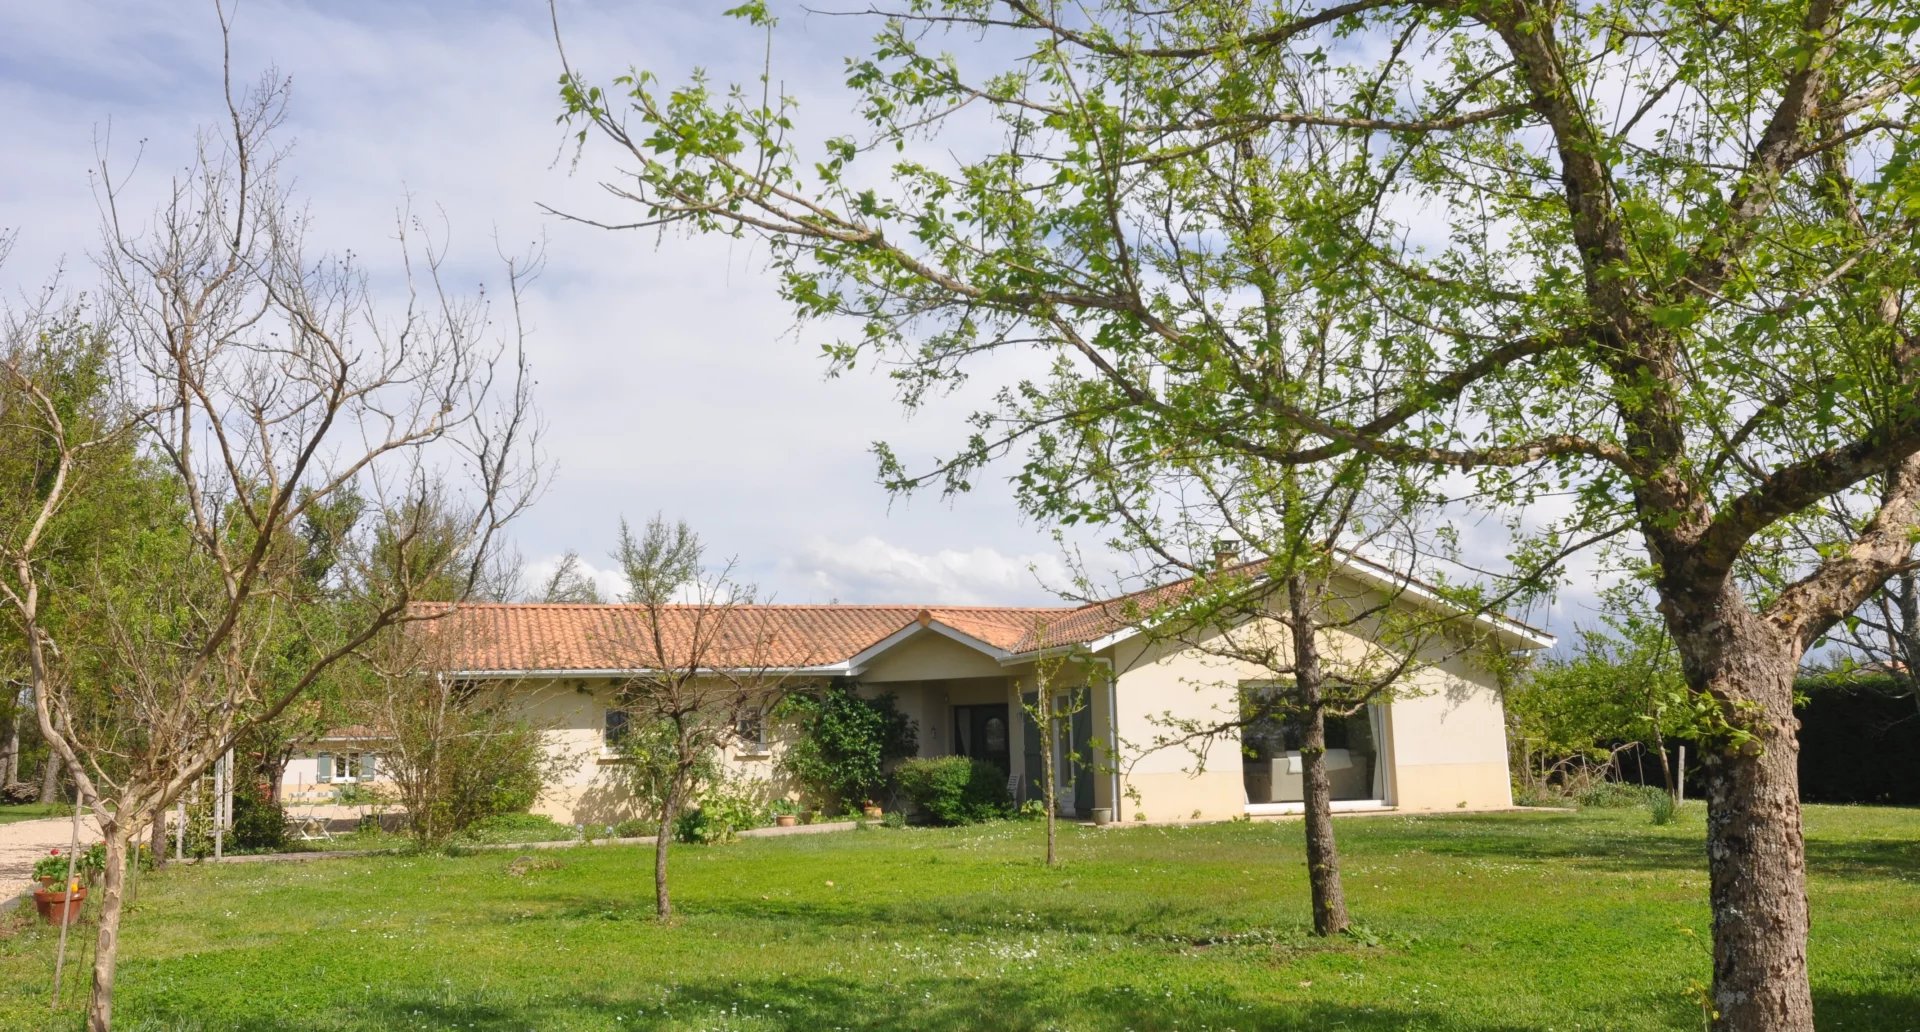 4-bedroom house on 6800 m² of land